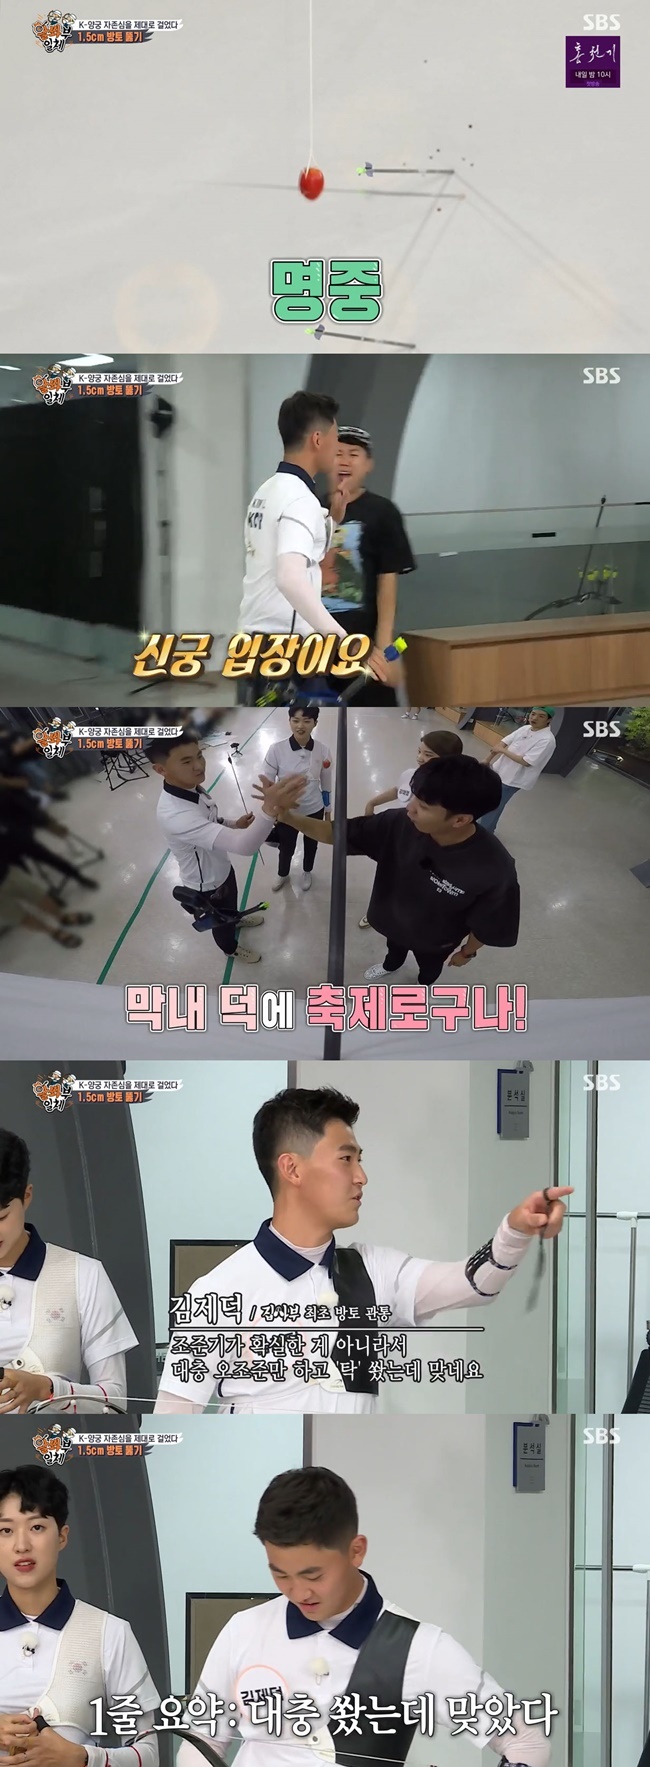 Kim je-deok succeeded in matching 1.5cm drop tomatoes.On August 29, SBS All The Butlers featured the archery national team Oh Jin-Hyek, Kim Woo-jin, Kim je-deok, Kang Chae-young, Kang Min-hee and Anshan, who won four gold medals at the 2020 Tokyo Olympics.On this day, the masters were divided into OB Oh Jin-Hyek, Kim Woo-jin, Kang Chae Young and YB Kang Min-hee, Anshan and Kim je-deok to challenge 1.5cm drop tomatoes.In the OB team, Kim Woo-jin and Kang Chae-young succeeded in crossing, and YB Kang Min-hee and Anshan failed.In response, Anshan cheered YB finalist Kim je-deok for you to believe; Kang Min-hee also boosted his strength as baby fighting.